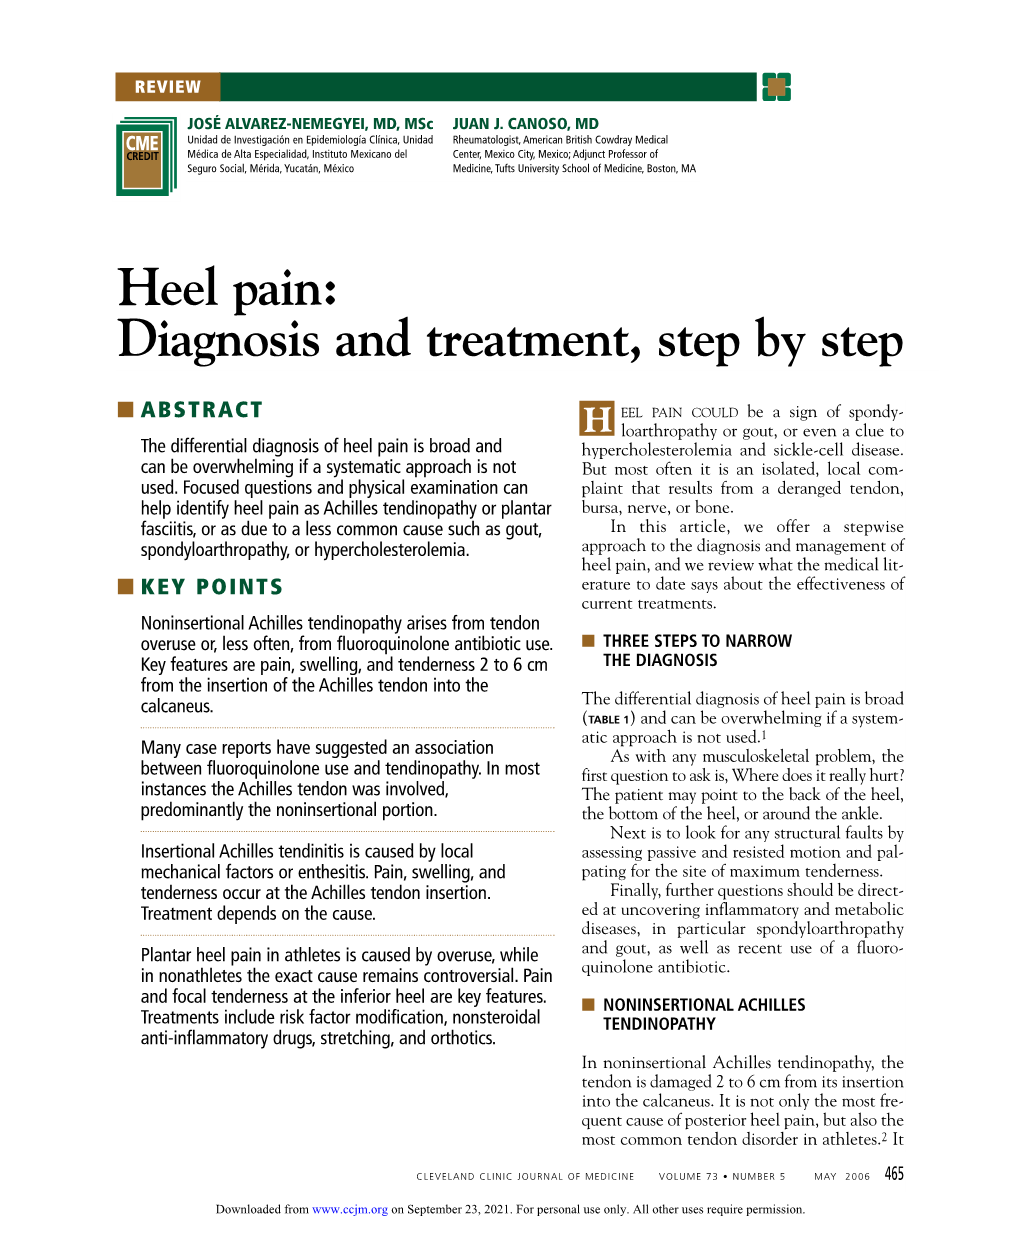 Heel Pain: Diagnosis and Treatment, Step by Step